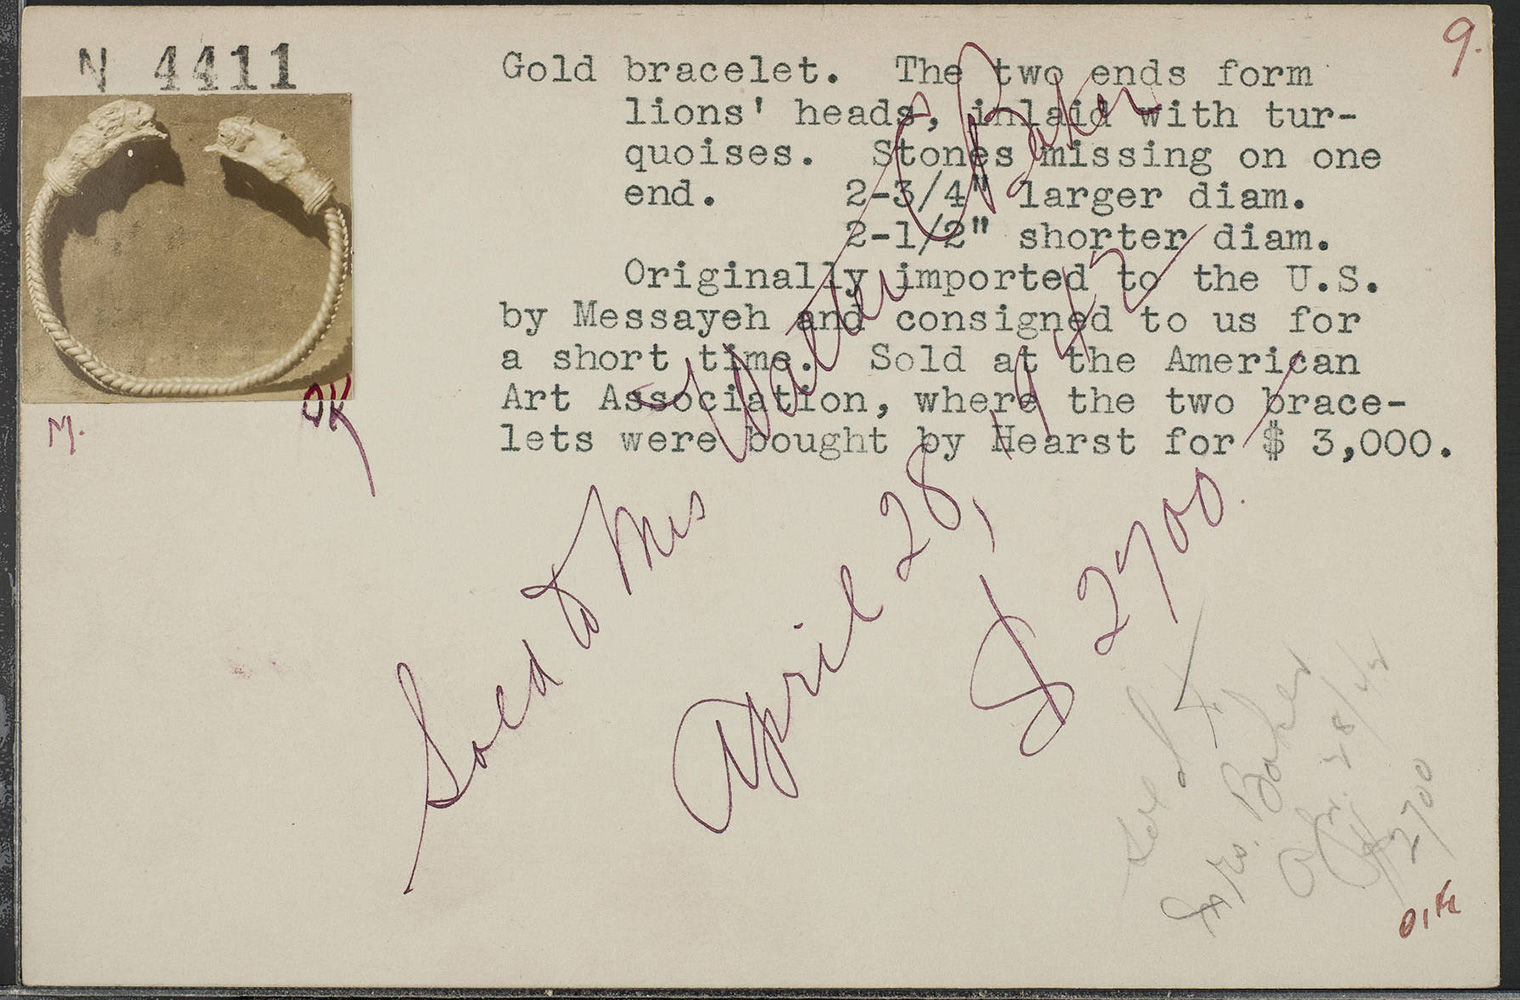 A small card with the picture of a bracelet on the top left hand corner and text that describes its provenance and dimensions.